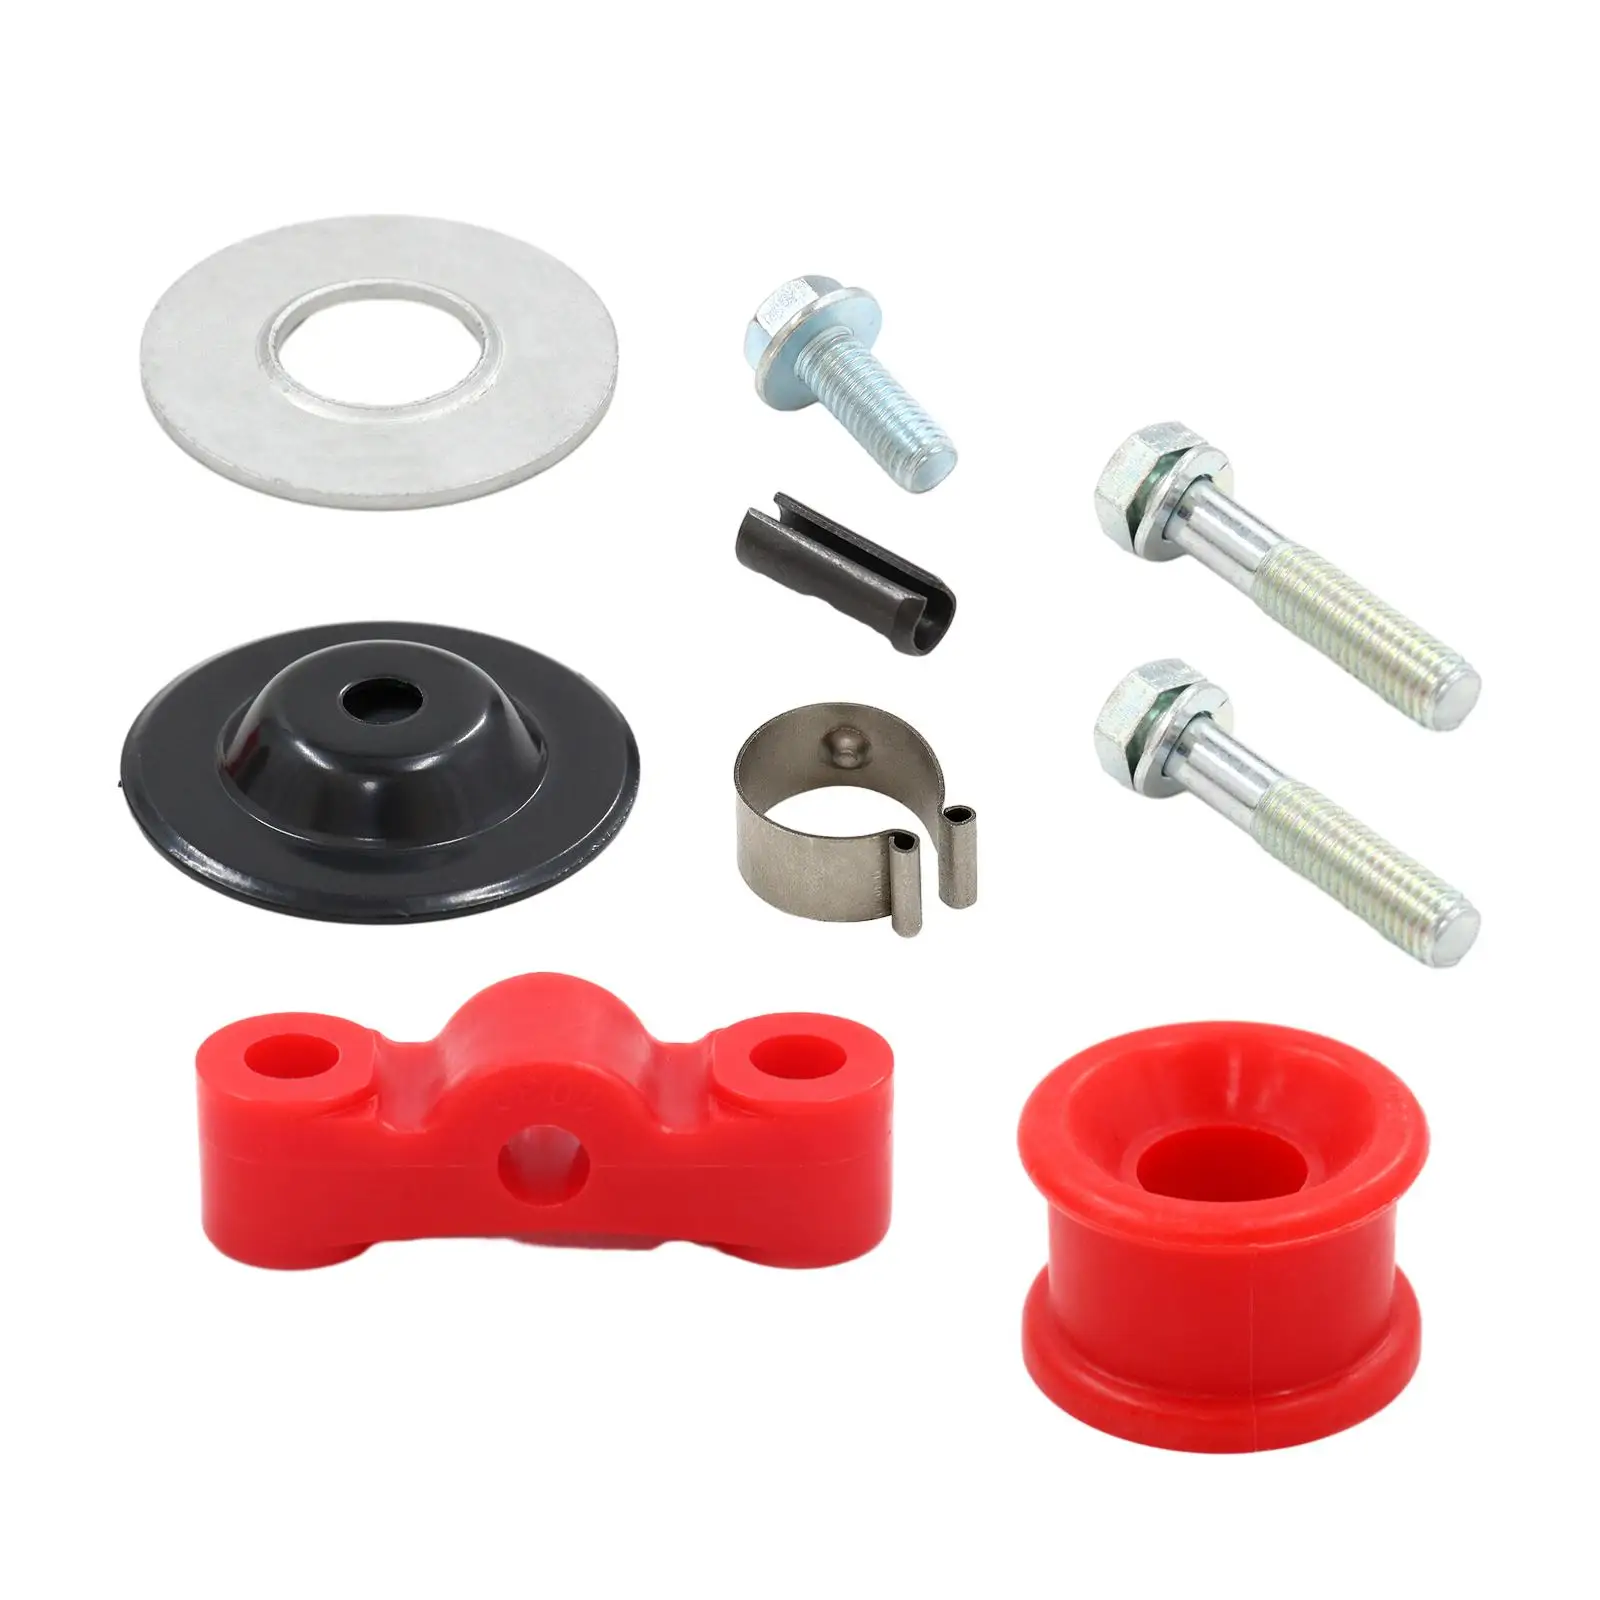 Red Shift Linkage Bushings Kit Auto Accessories for Honda Crx Durable